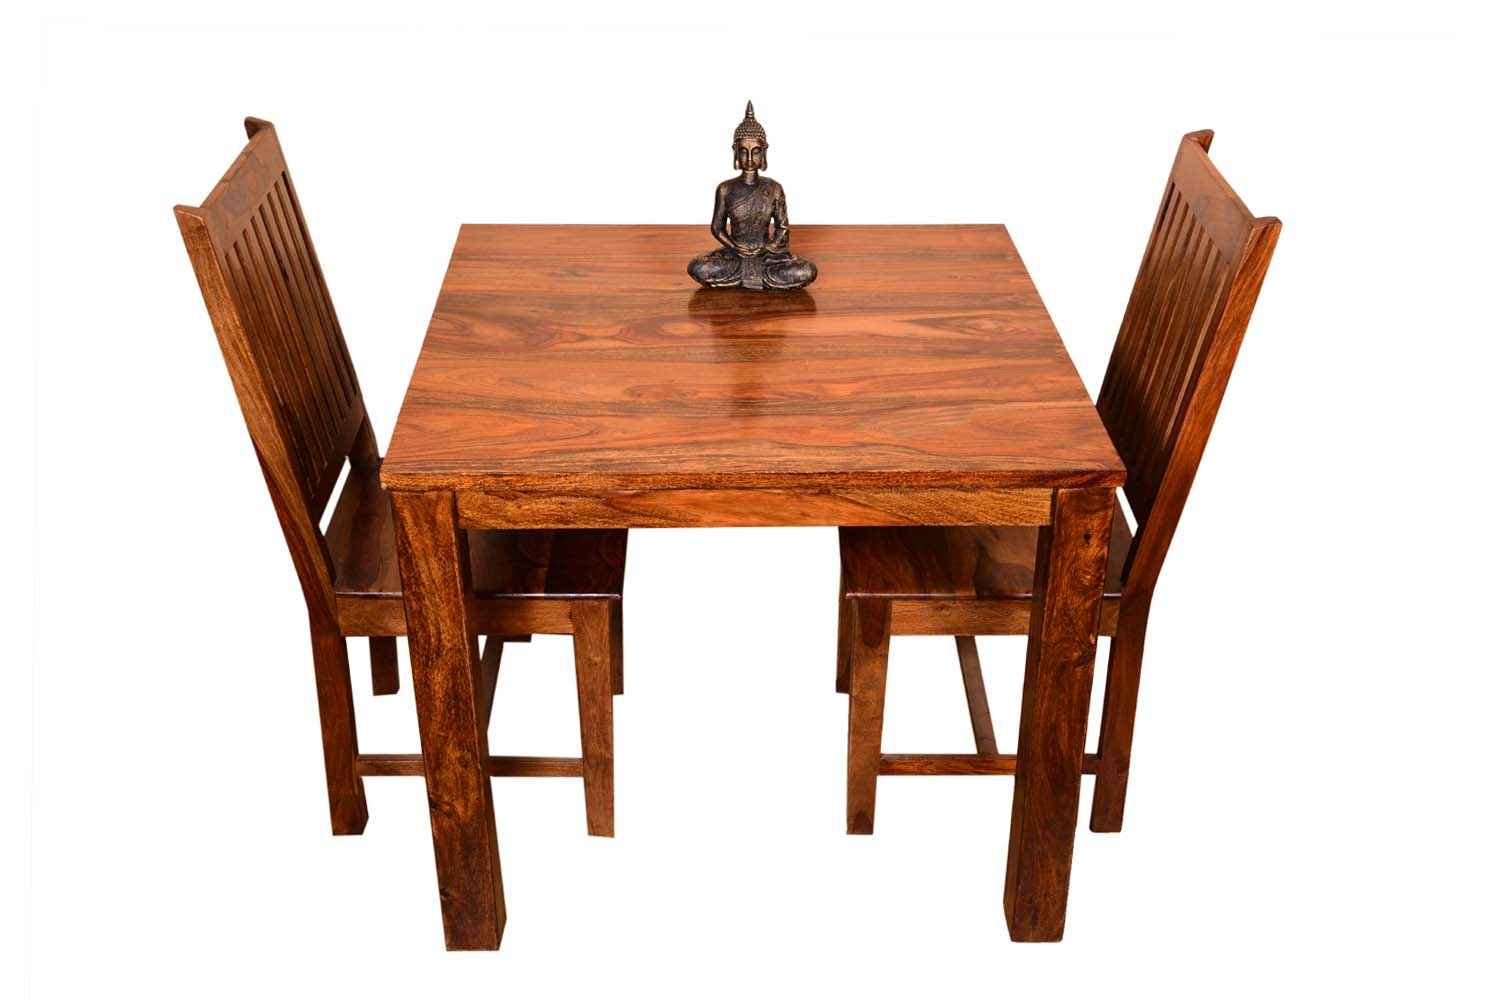 Buy 4 Seater Compact Square Dining Table Set | Dining Room, 4 Seater